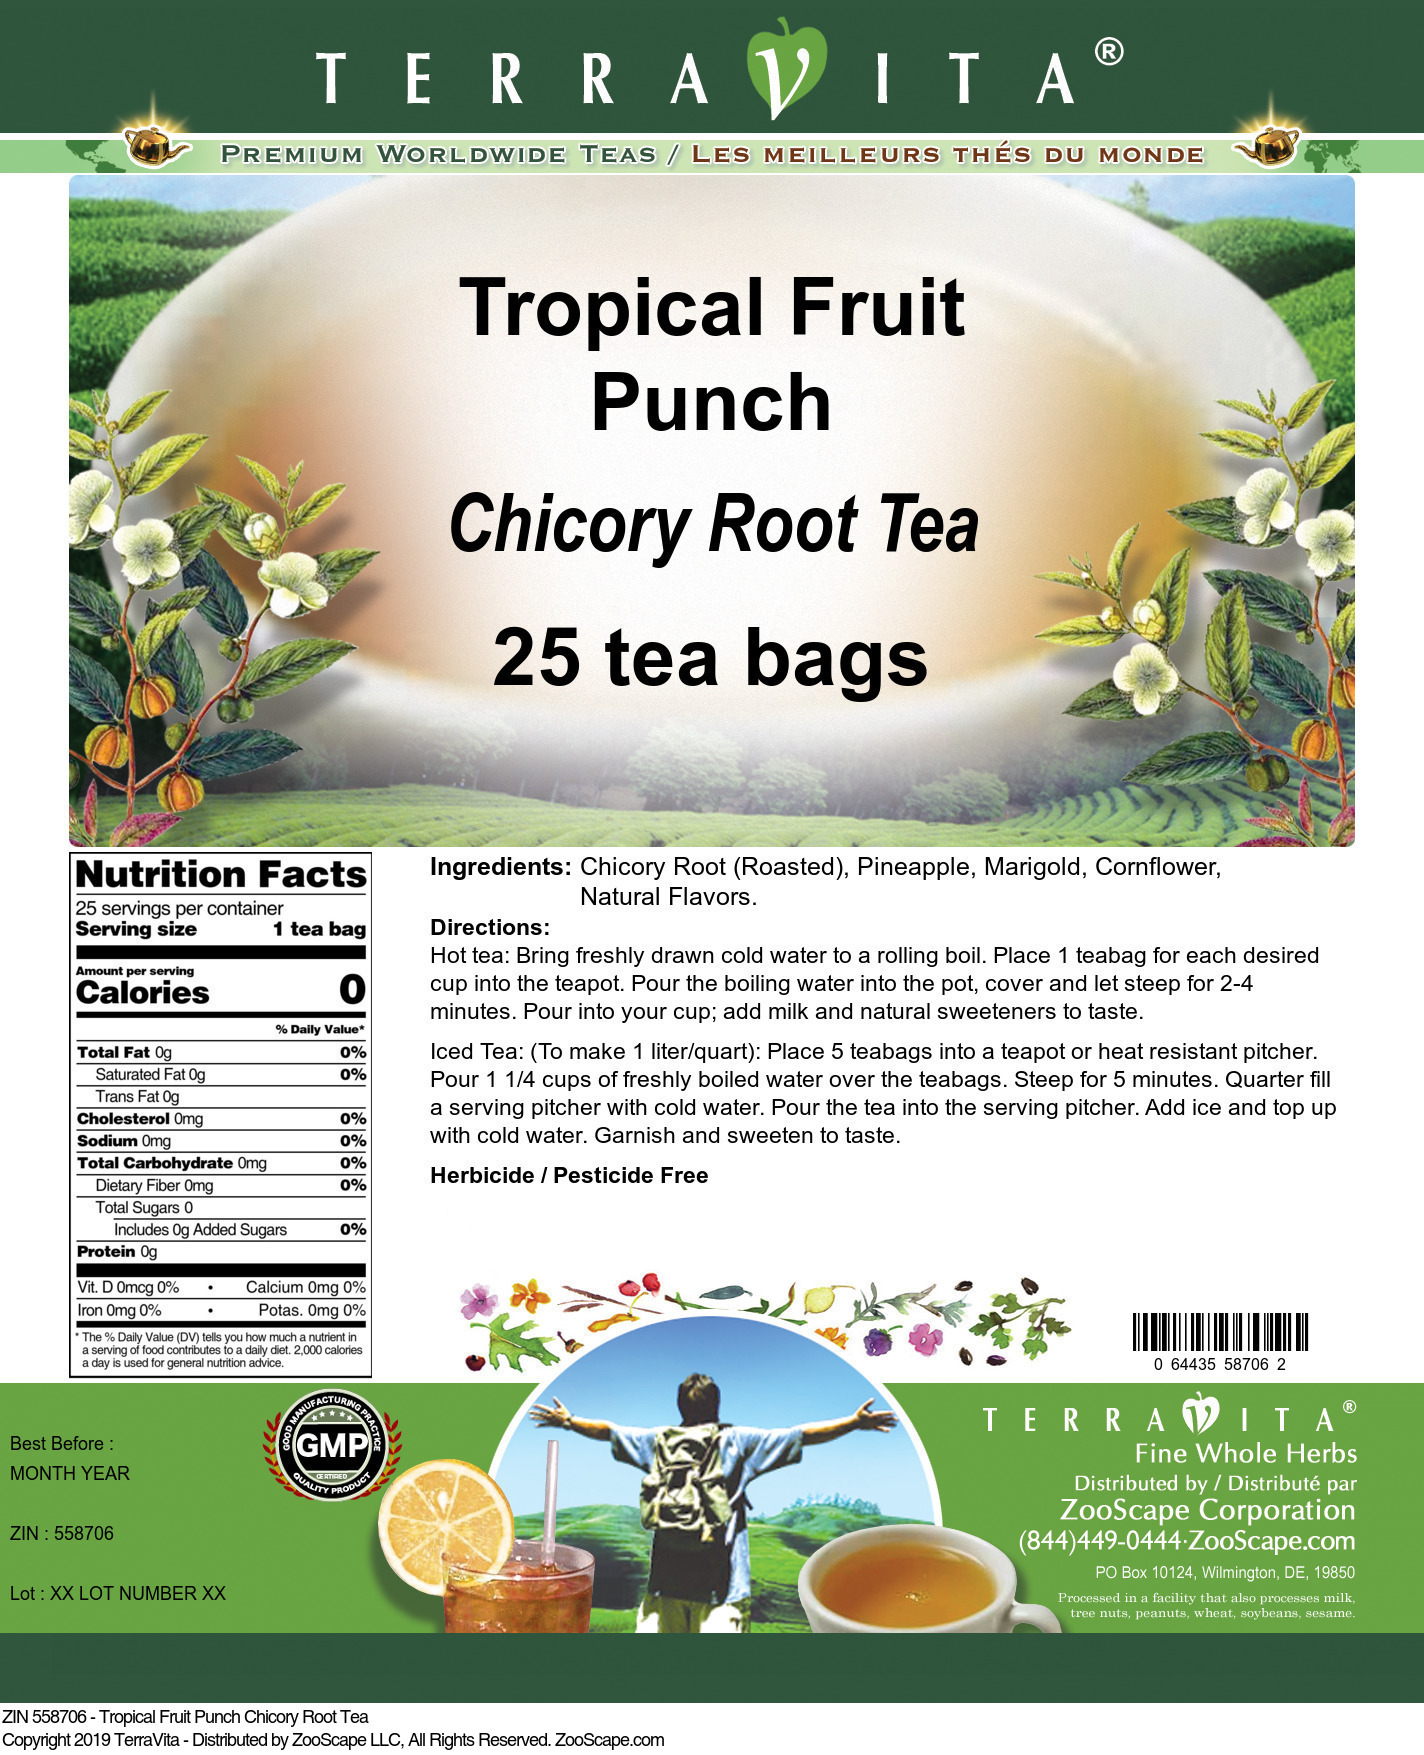 Tropical Fruit Punch Chicory Root Tea - Label